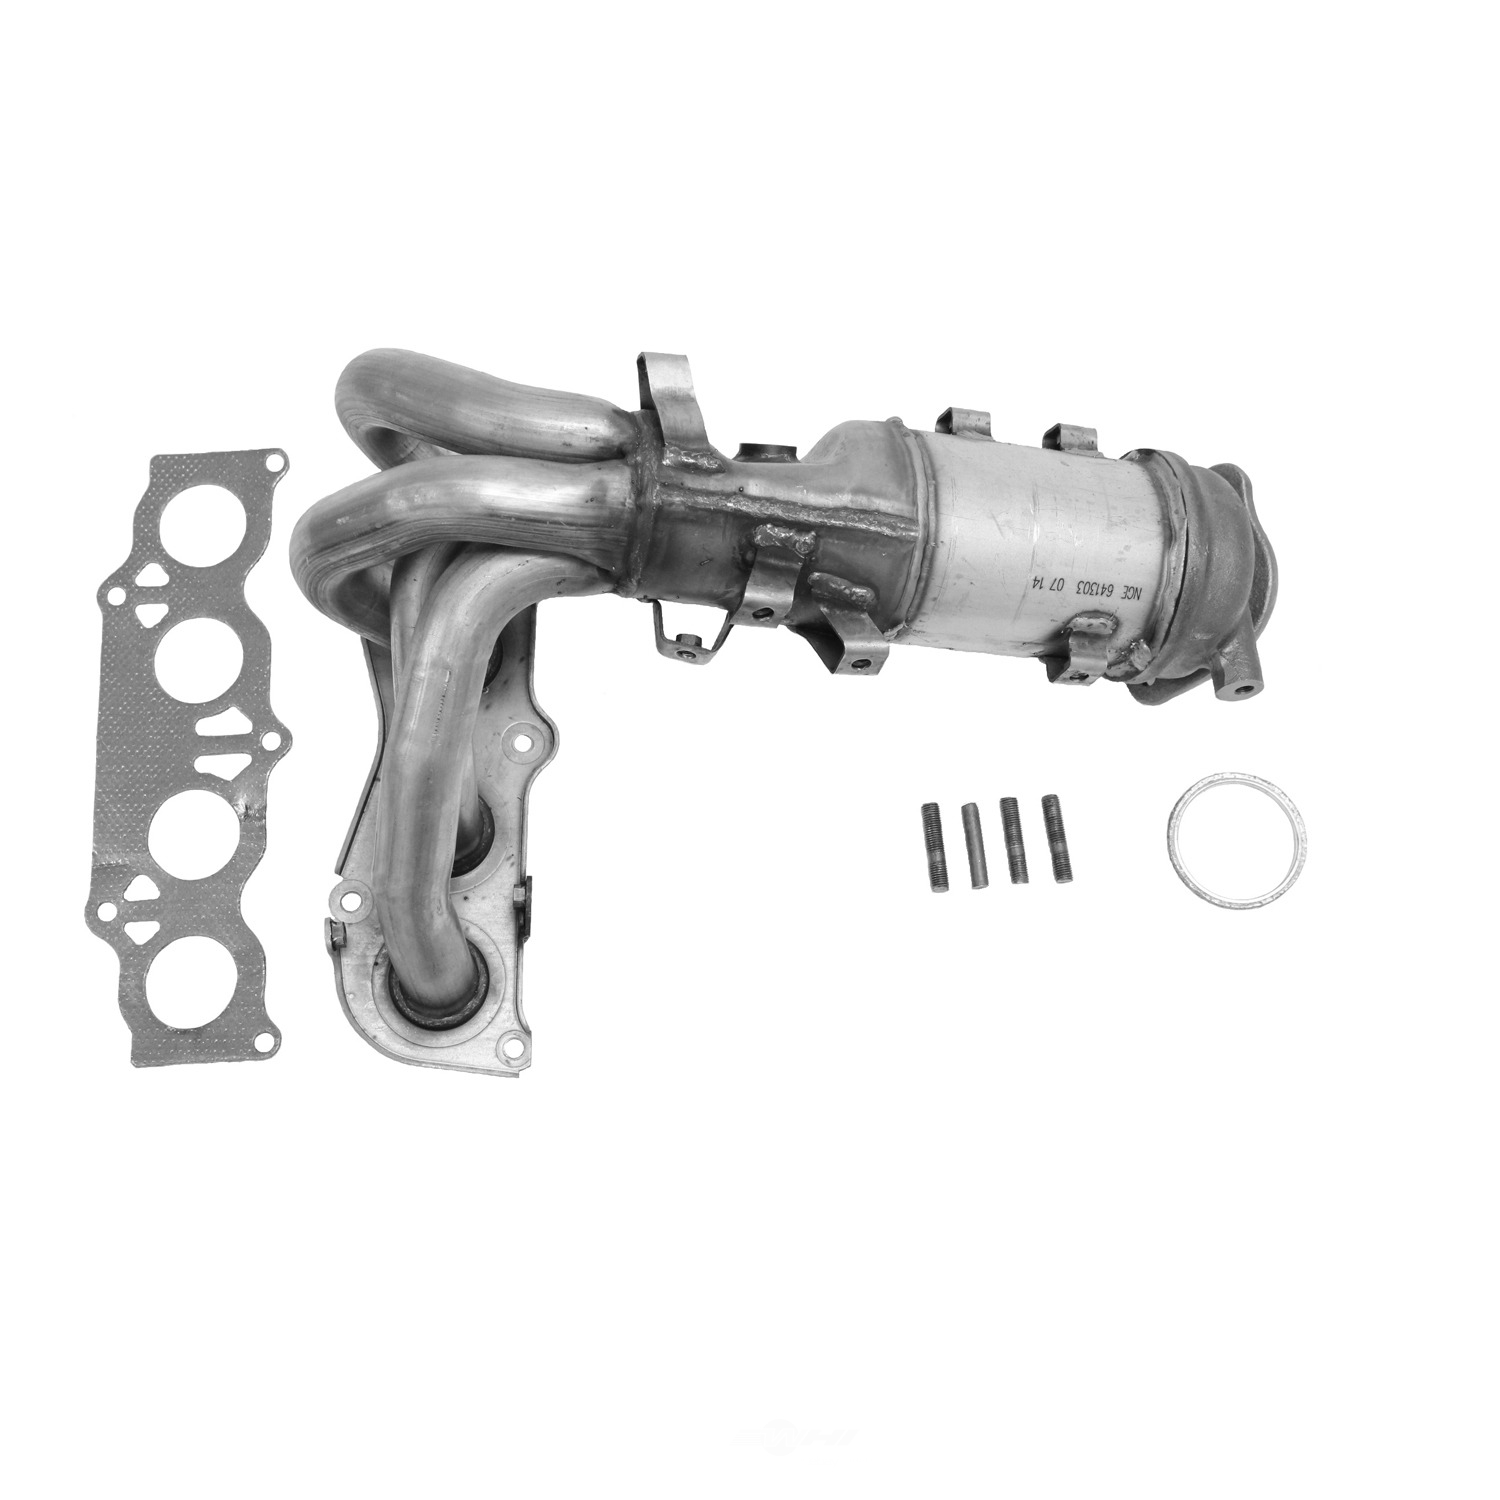 AP EXHAUST FEDERAL CONVERTER - Direct Fit Converter w/ Manifold - APG 641303